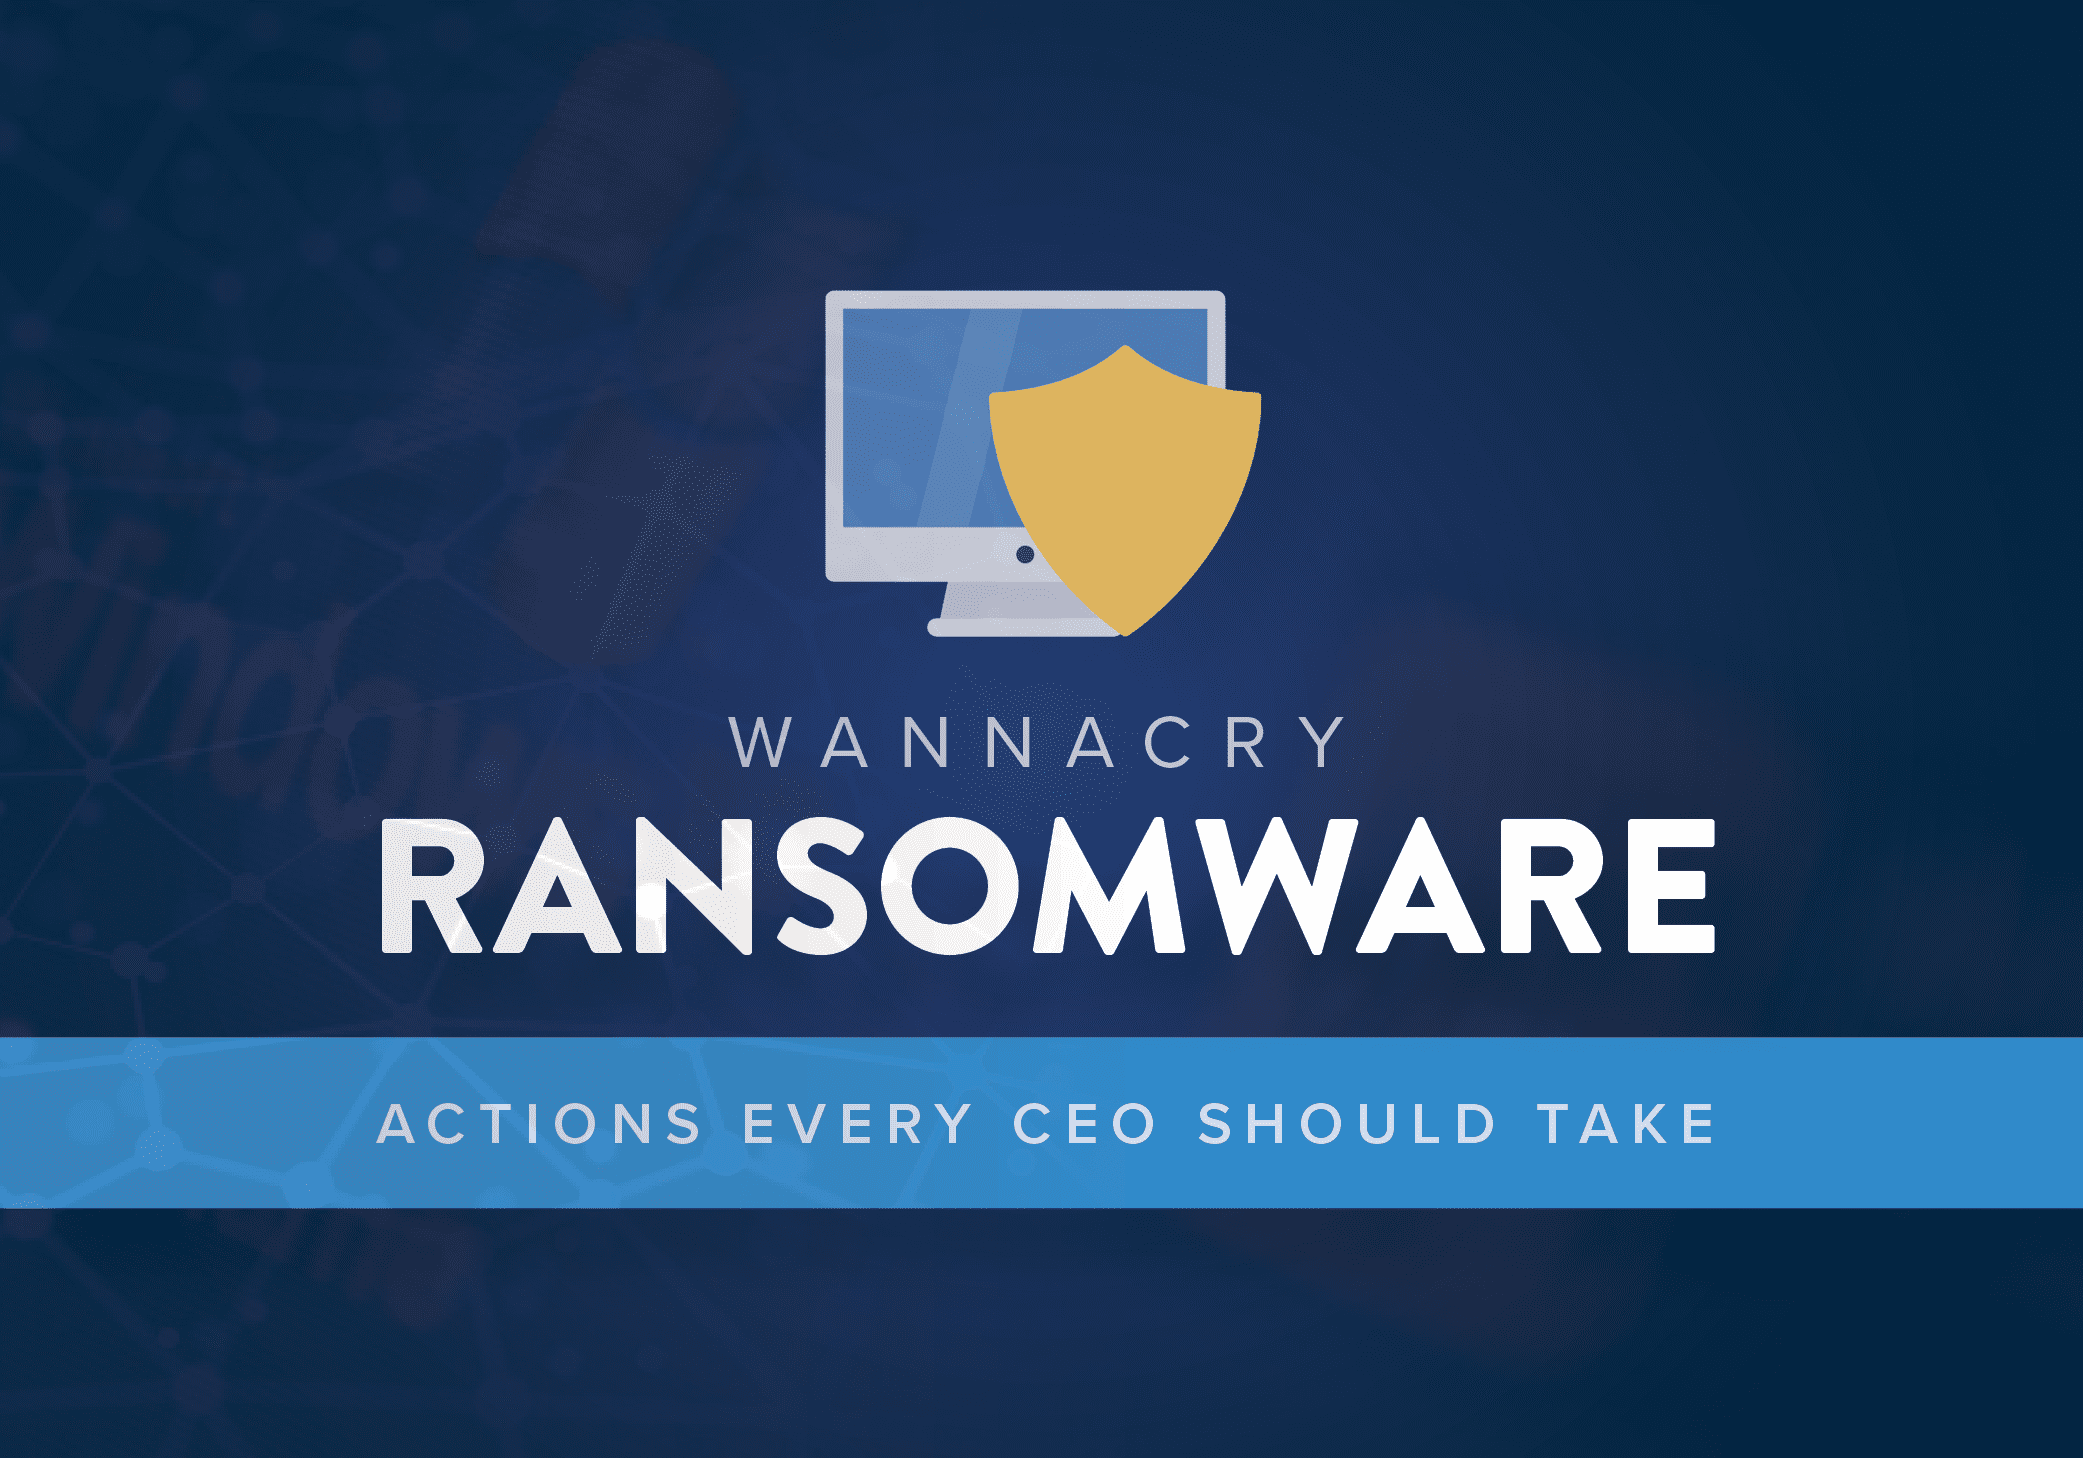 Actions Every CEO Must Take to Protect Their Organization from WannaCry Malware